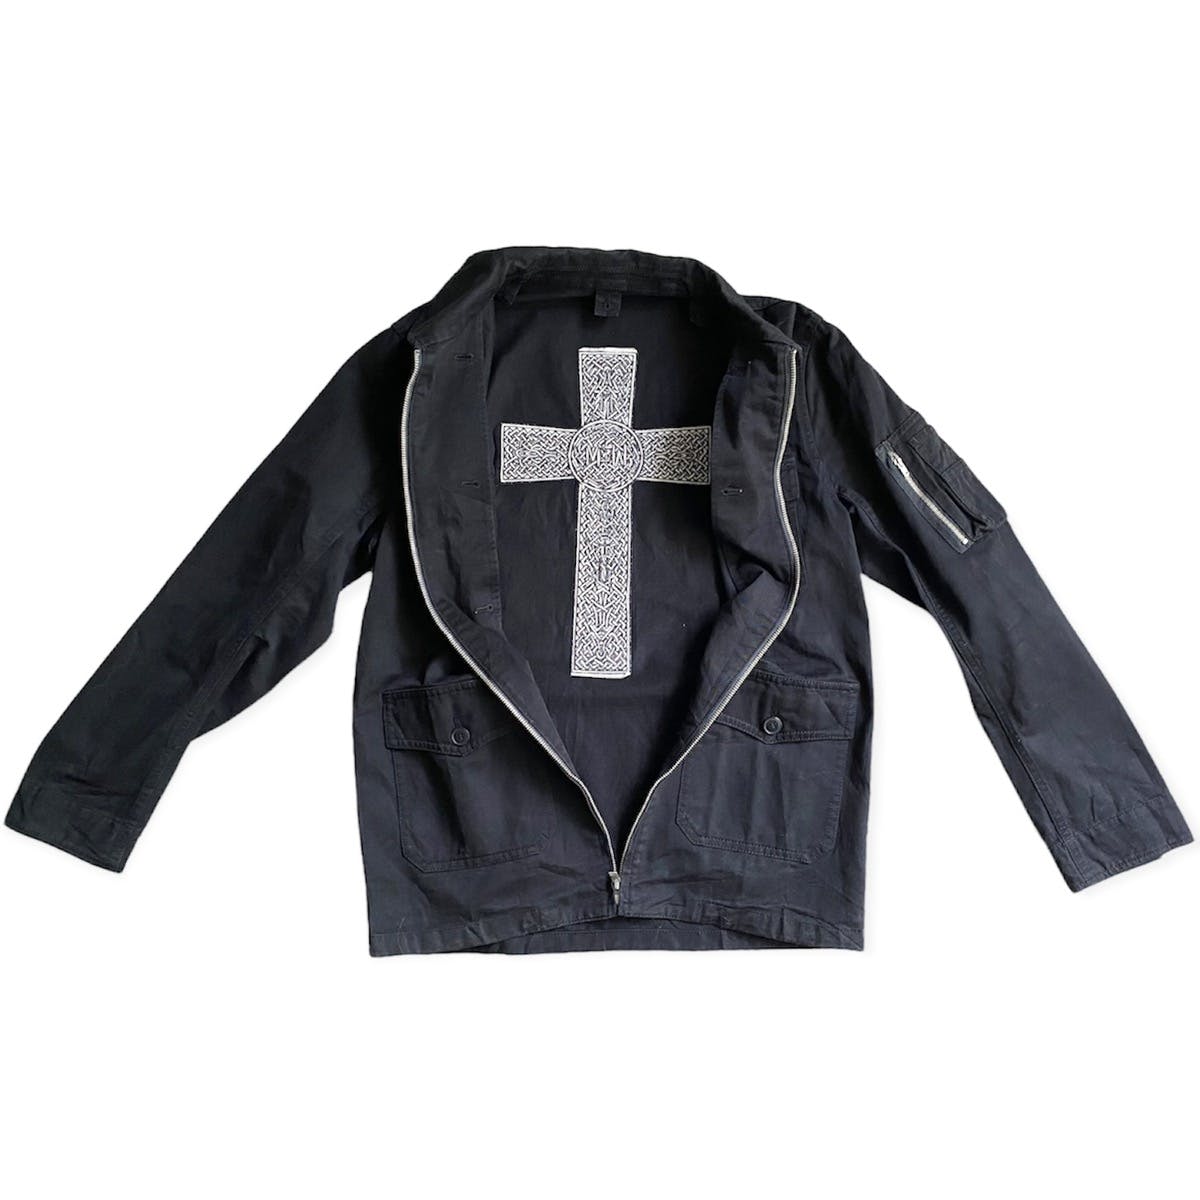 Celtic Cross Embroidered Field Jacket - 1